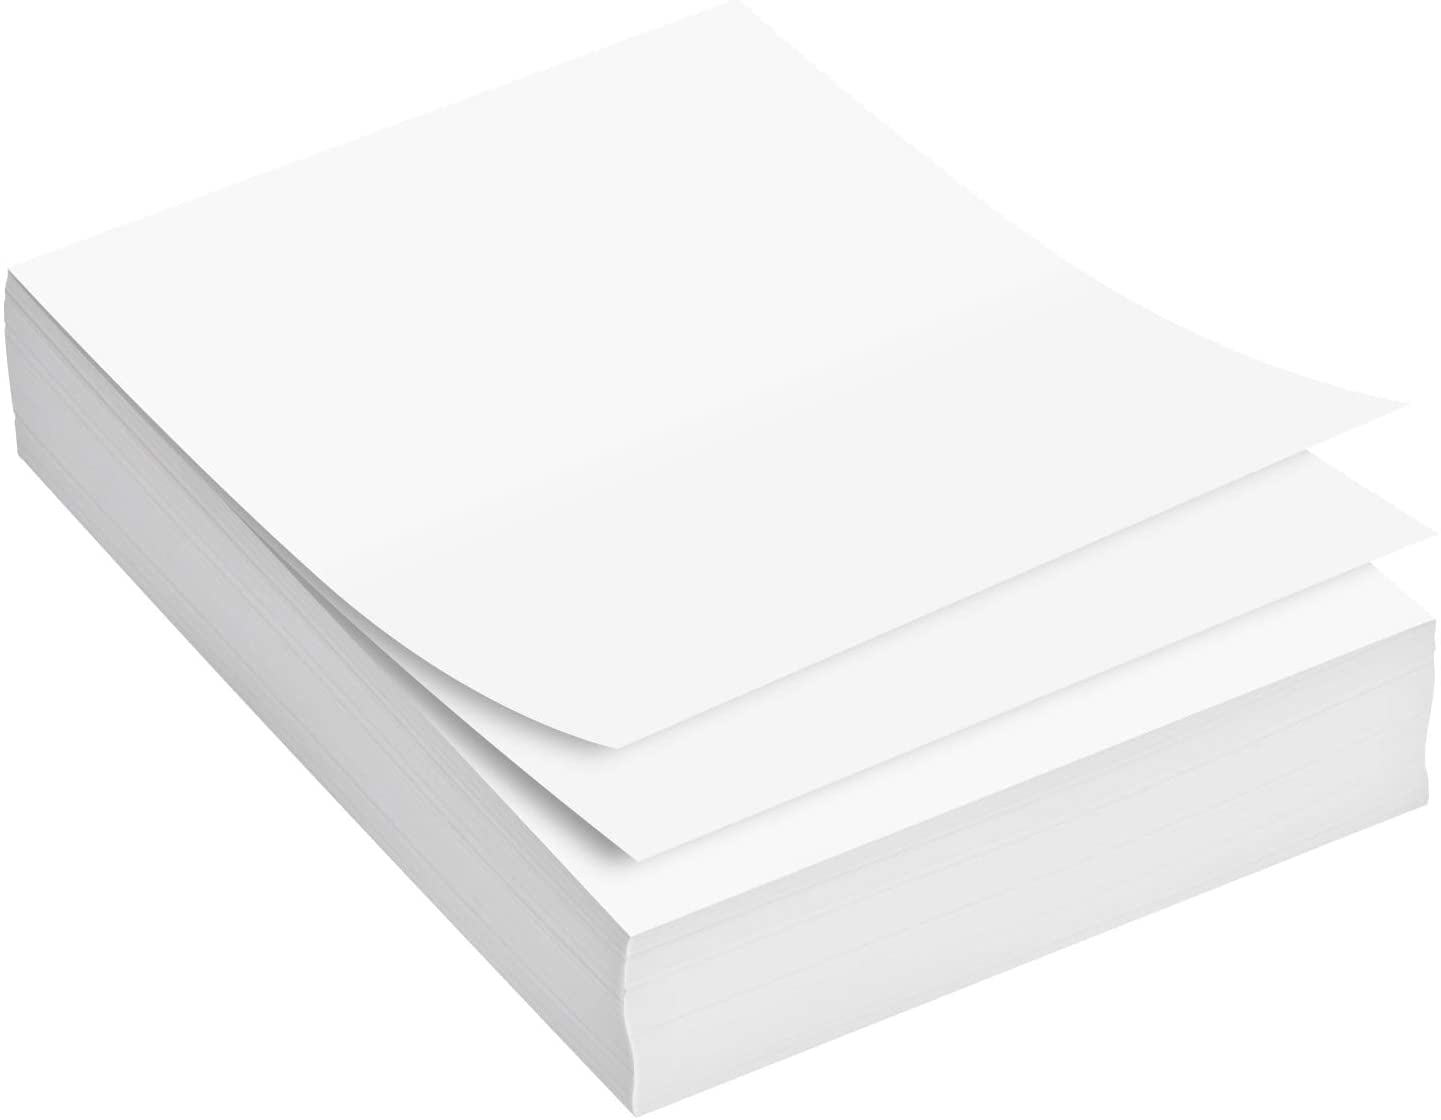 100 Sheets Printing Paper A4 80GSM White Plain Sheet Office School Photocopy 